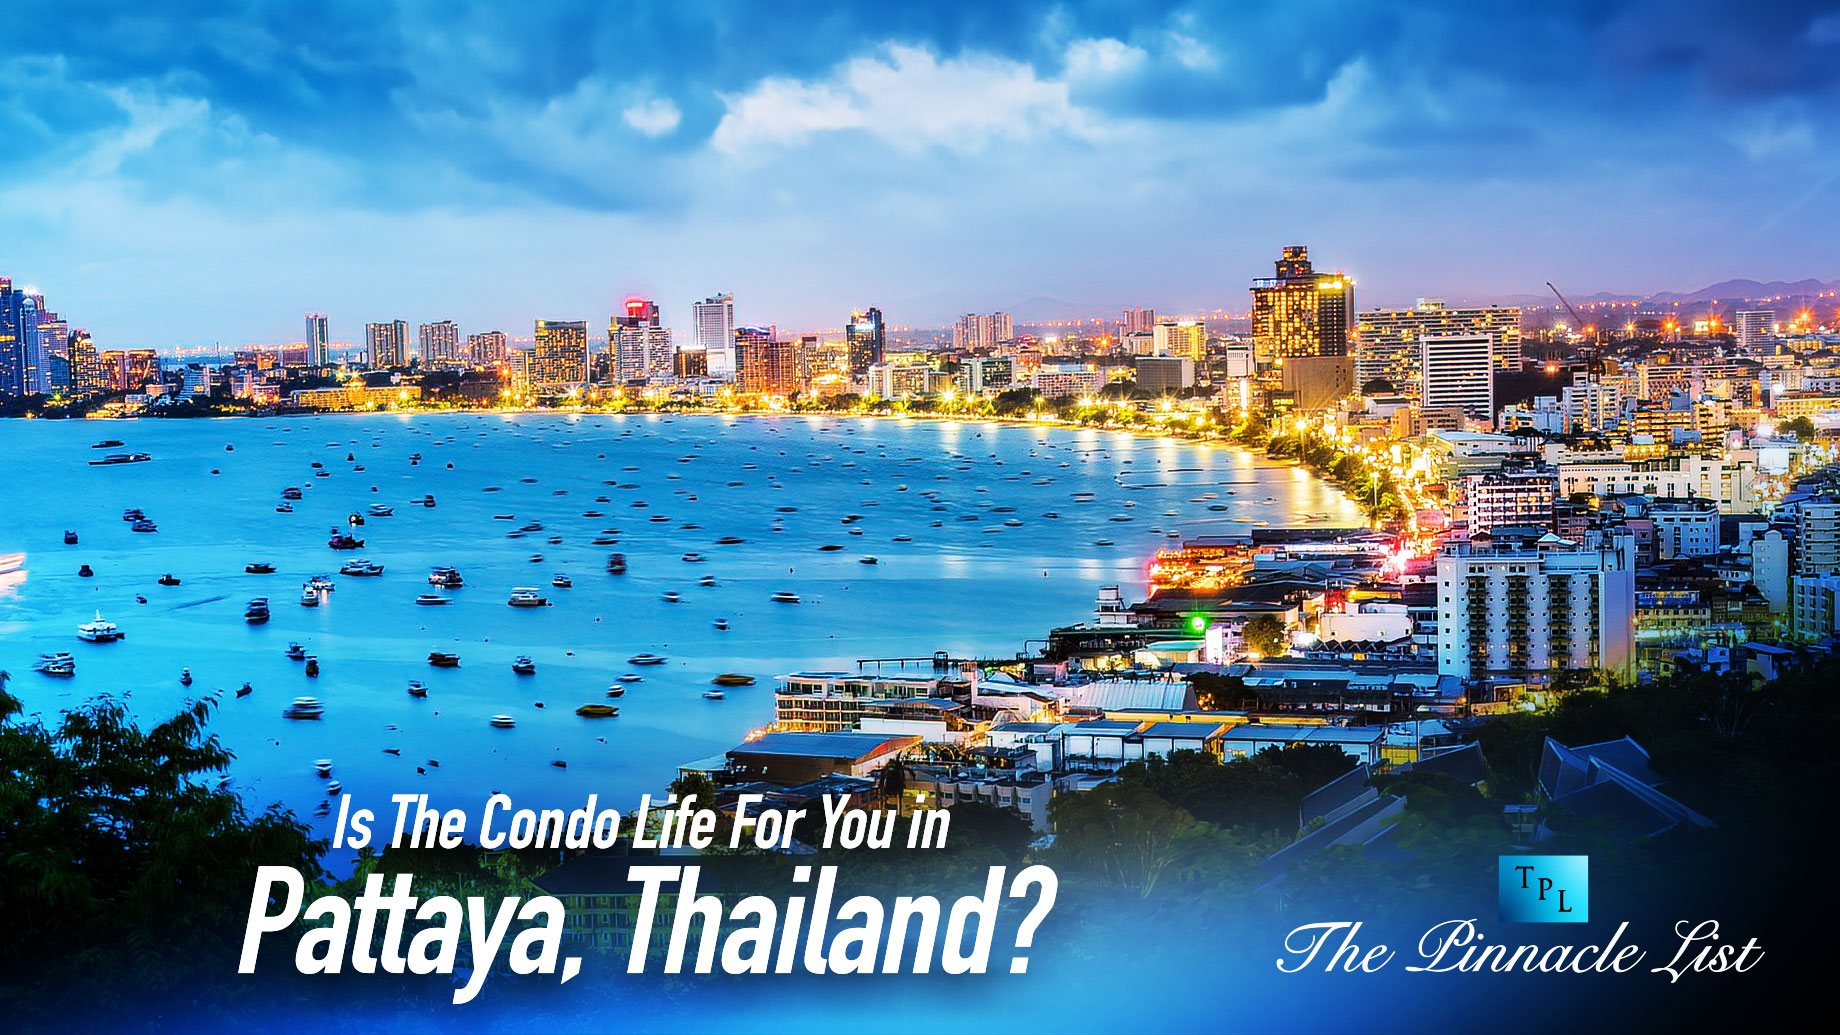 Is The Condo Life For You in Pattaya, Thailand?